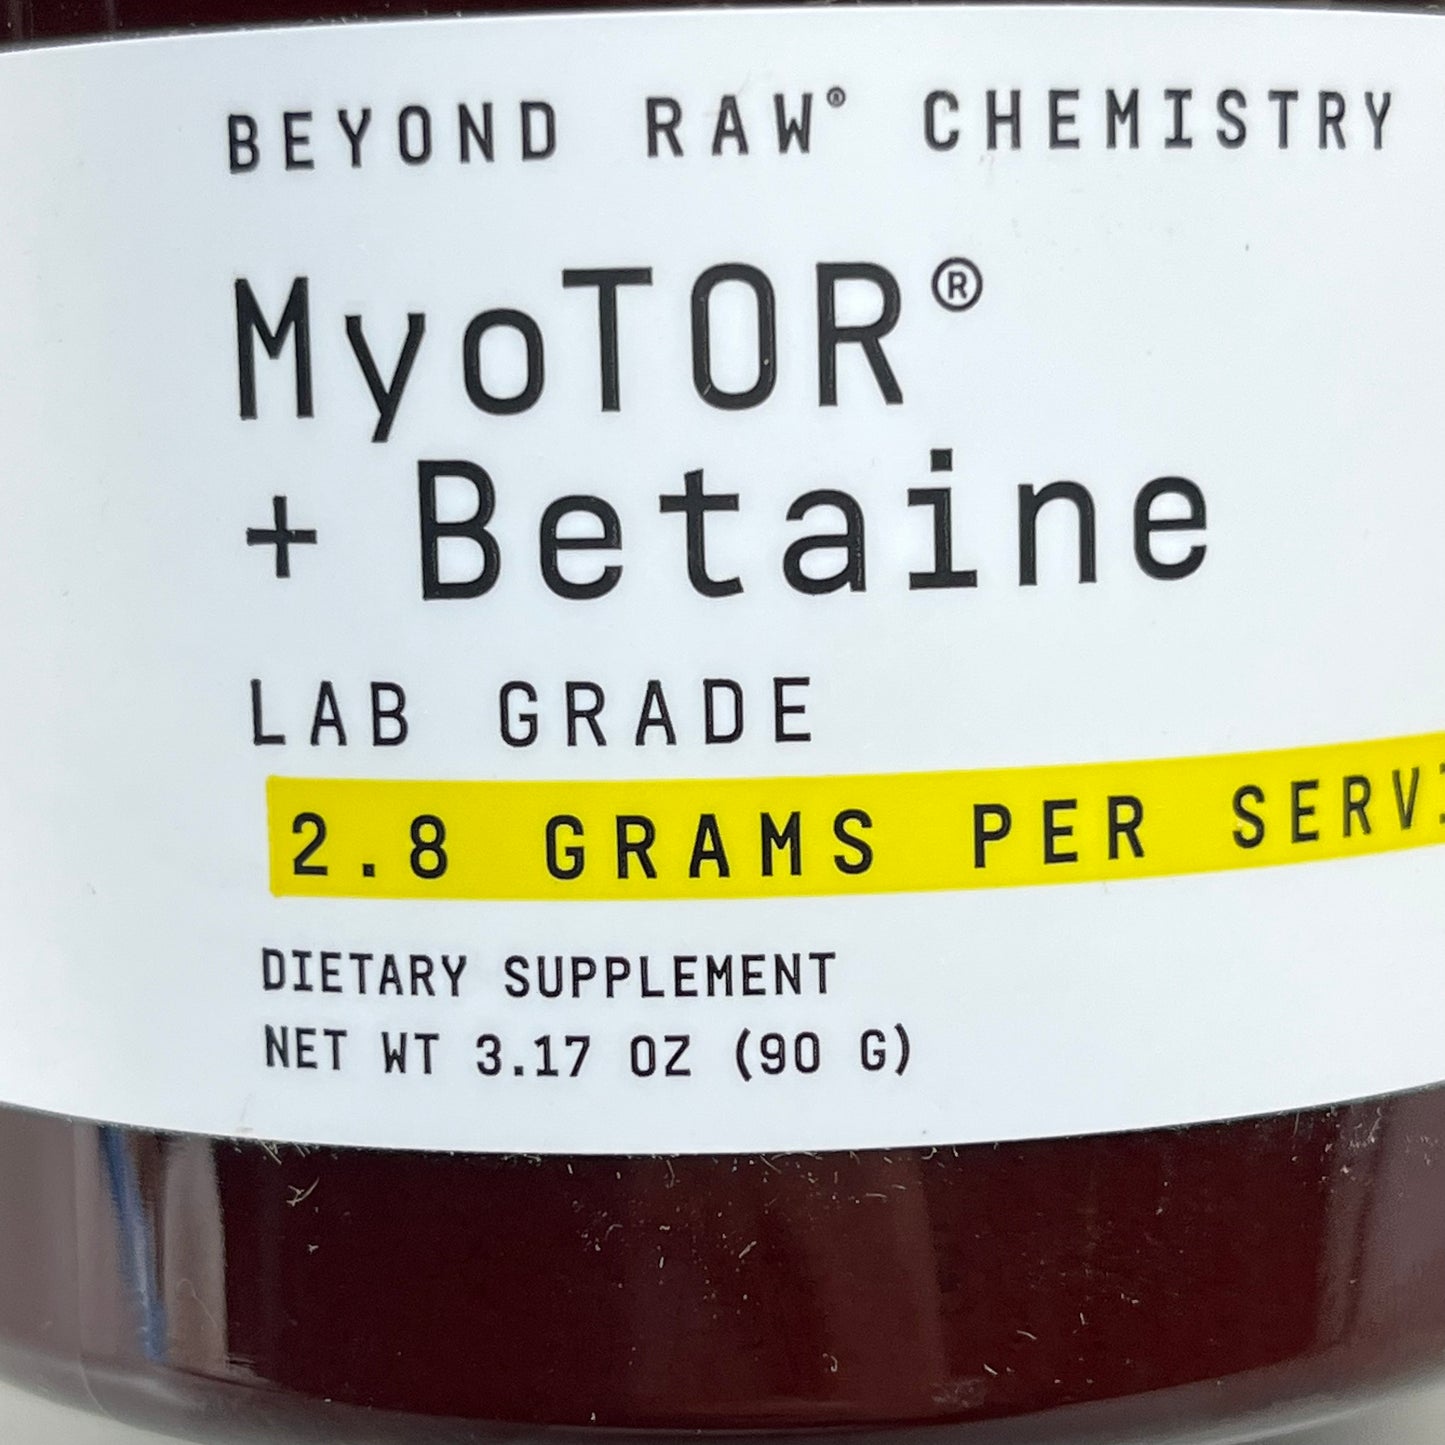 BEYOND RAW Chemistry Labs MyoTOR & Betaine Lab Grade 3.17 oz. 90g 364420 Exp: 10/24 (New)